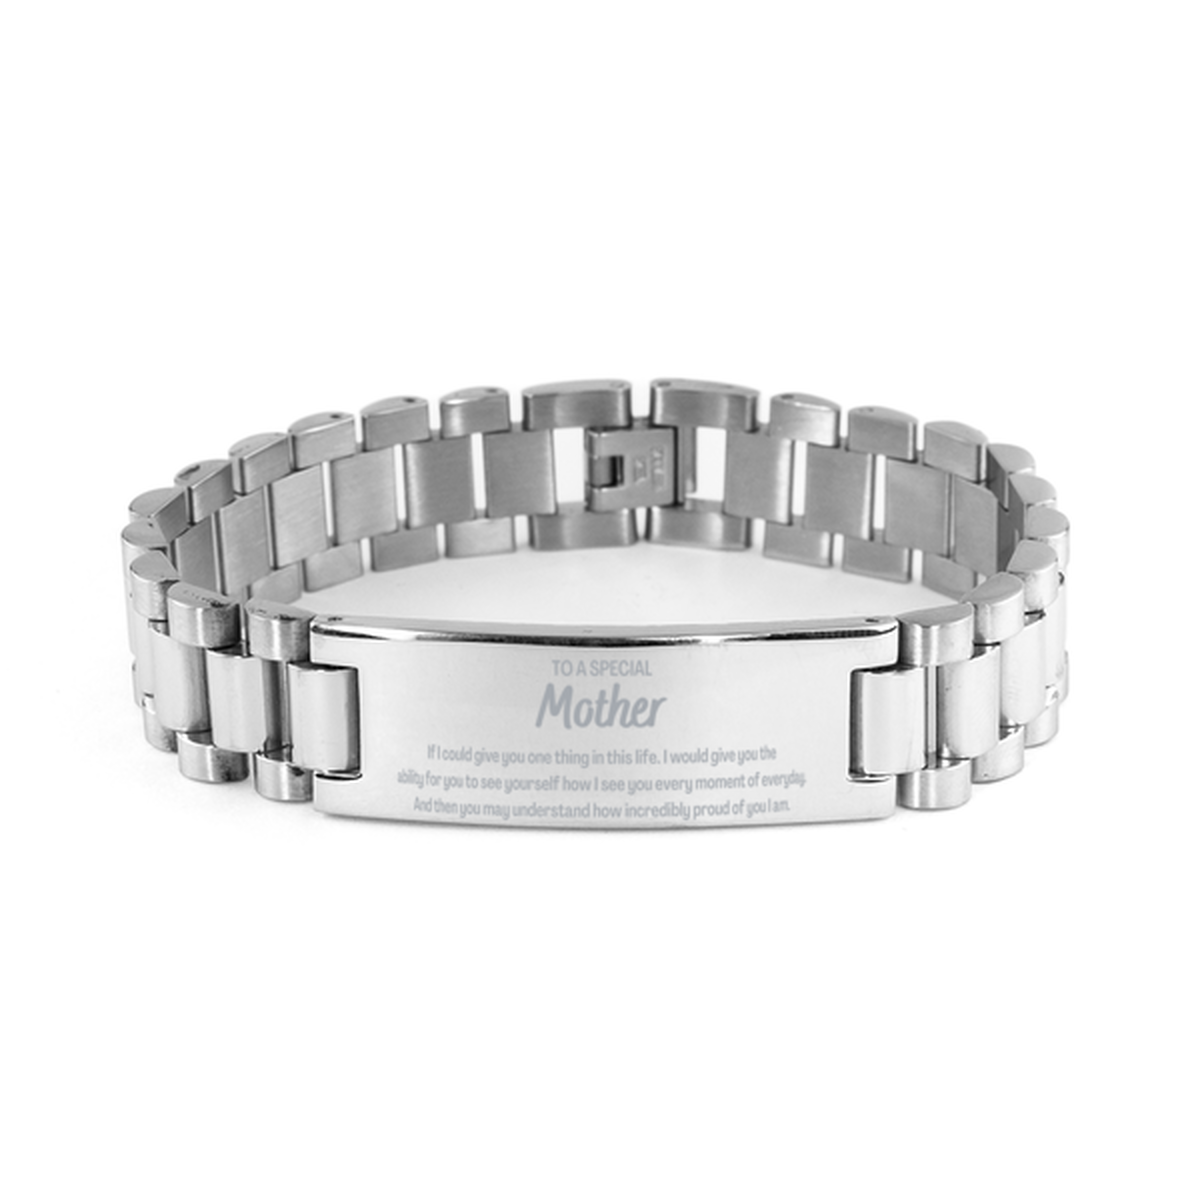 To My Mother Ladder Stainless Steel Bracelet, Gifts For Mother Engraved, Inspirational Gifts for Christmas Birthday, Epic Gifts for Mother To A Special Mother how incredibly proud of you I am